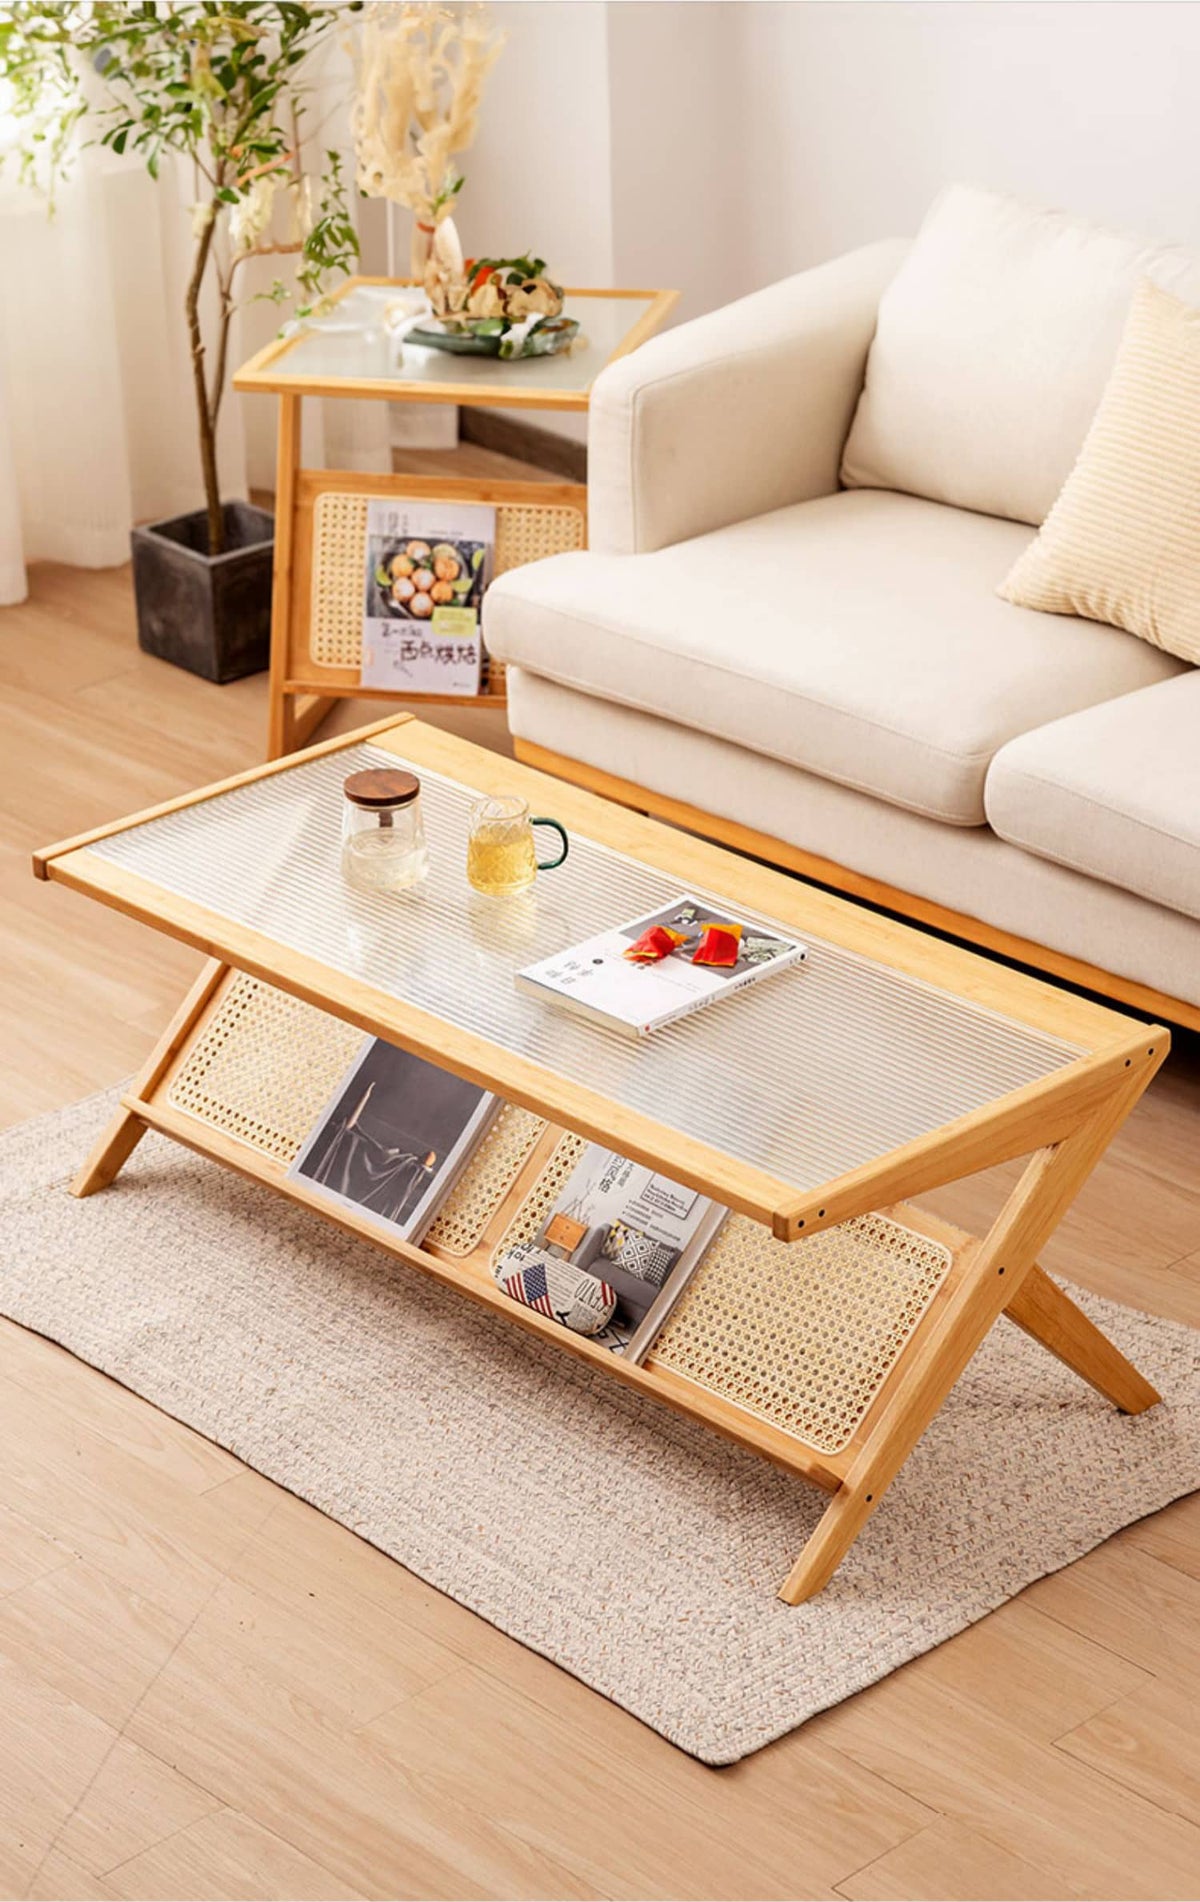 Stylish Dark Brown Bamboo Tea Table with Glass Top - Durable ABS Resin Design hsl-79